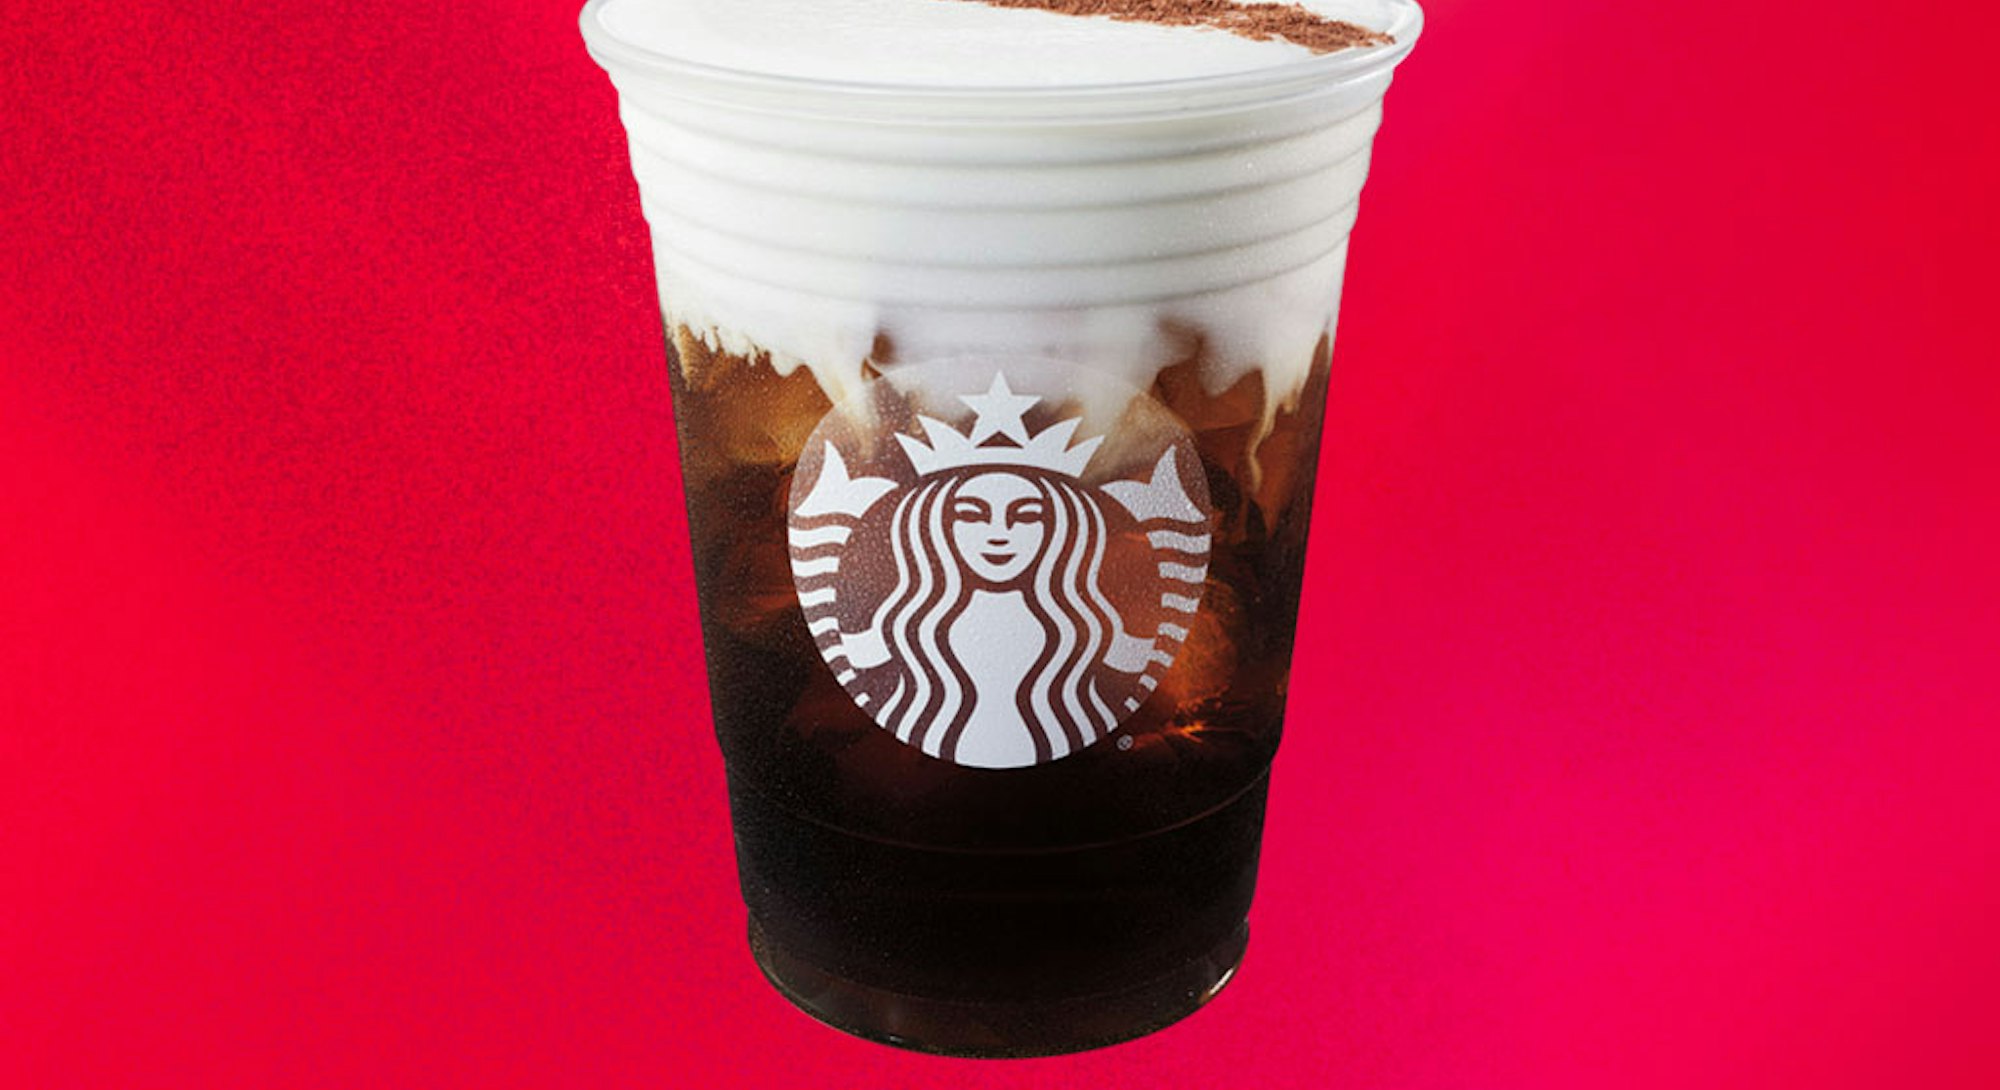 A holiday drink from Starbucks is perfect for various holiday fiascos.